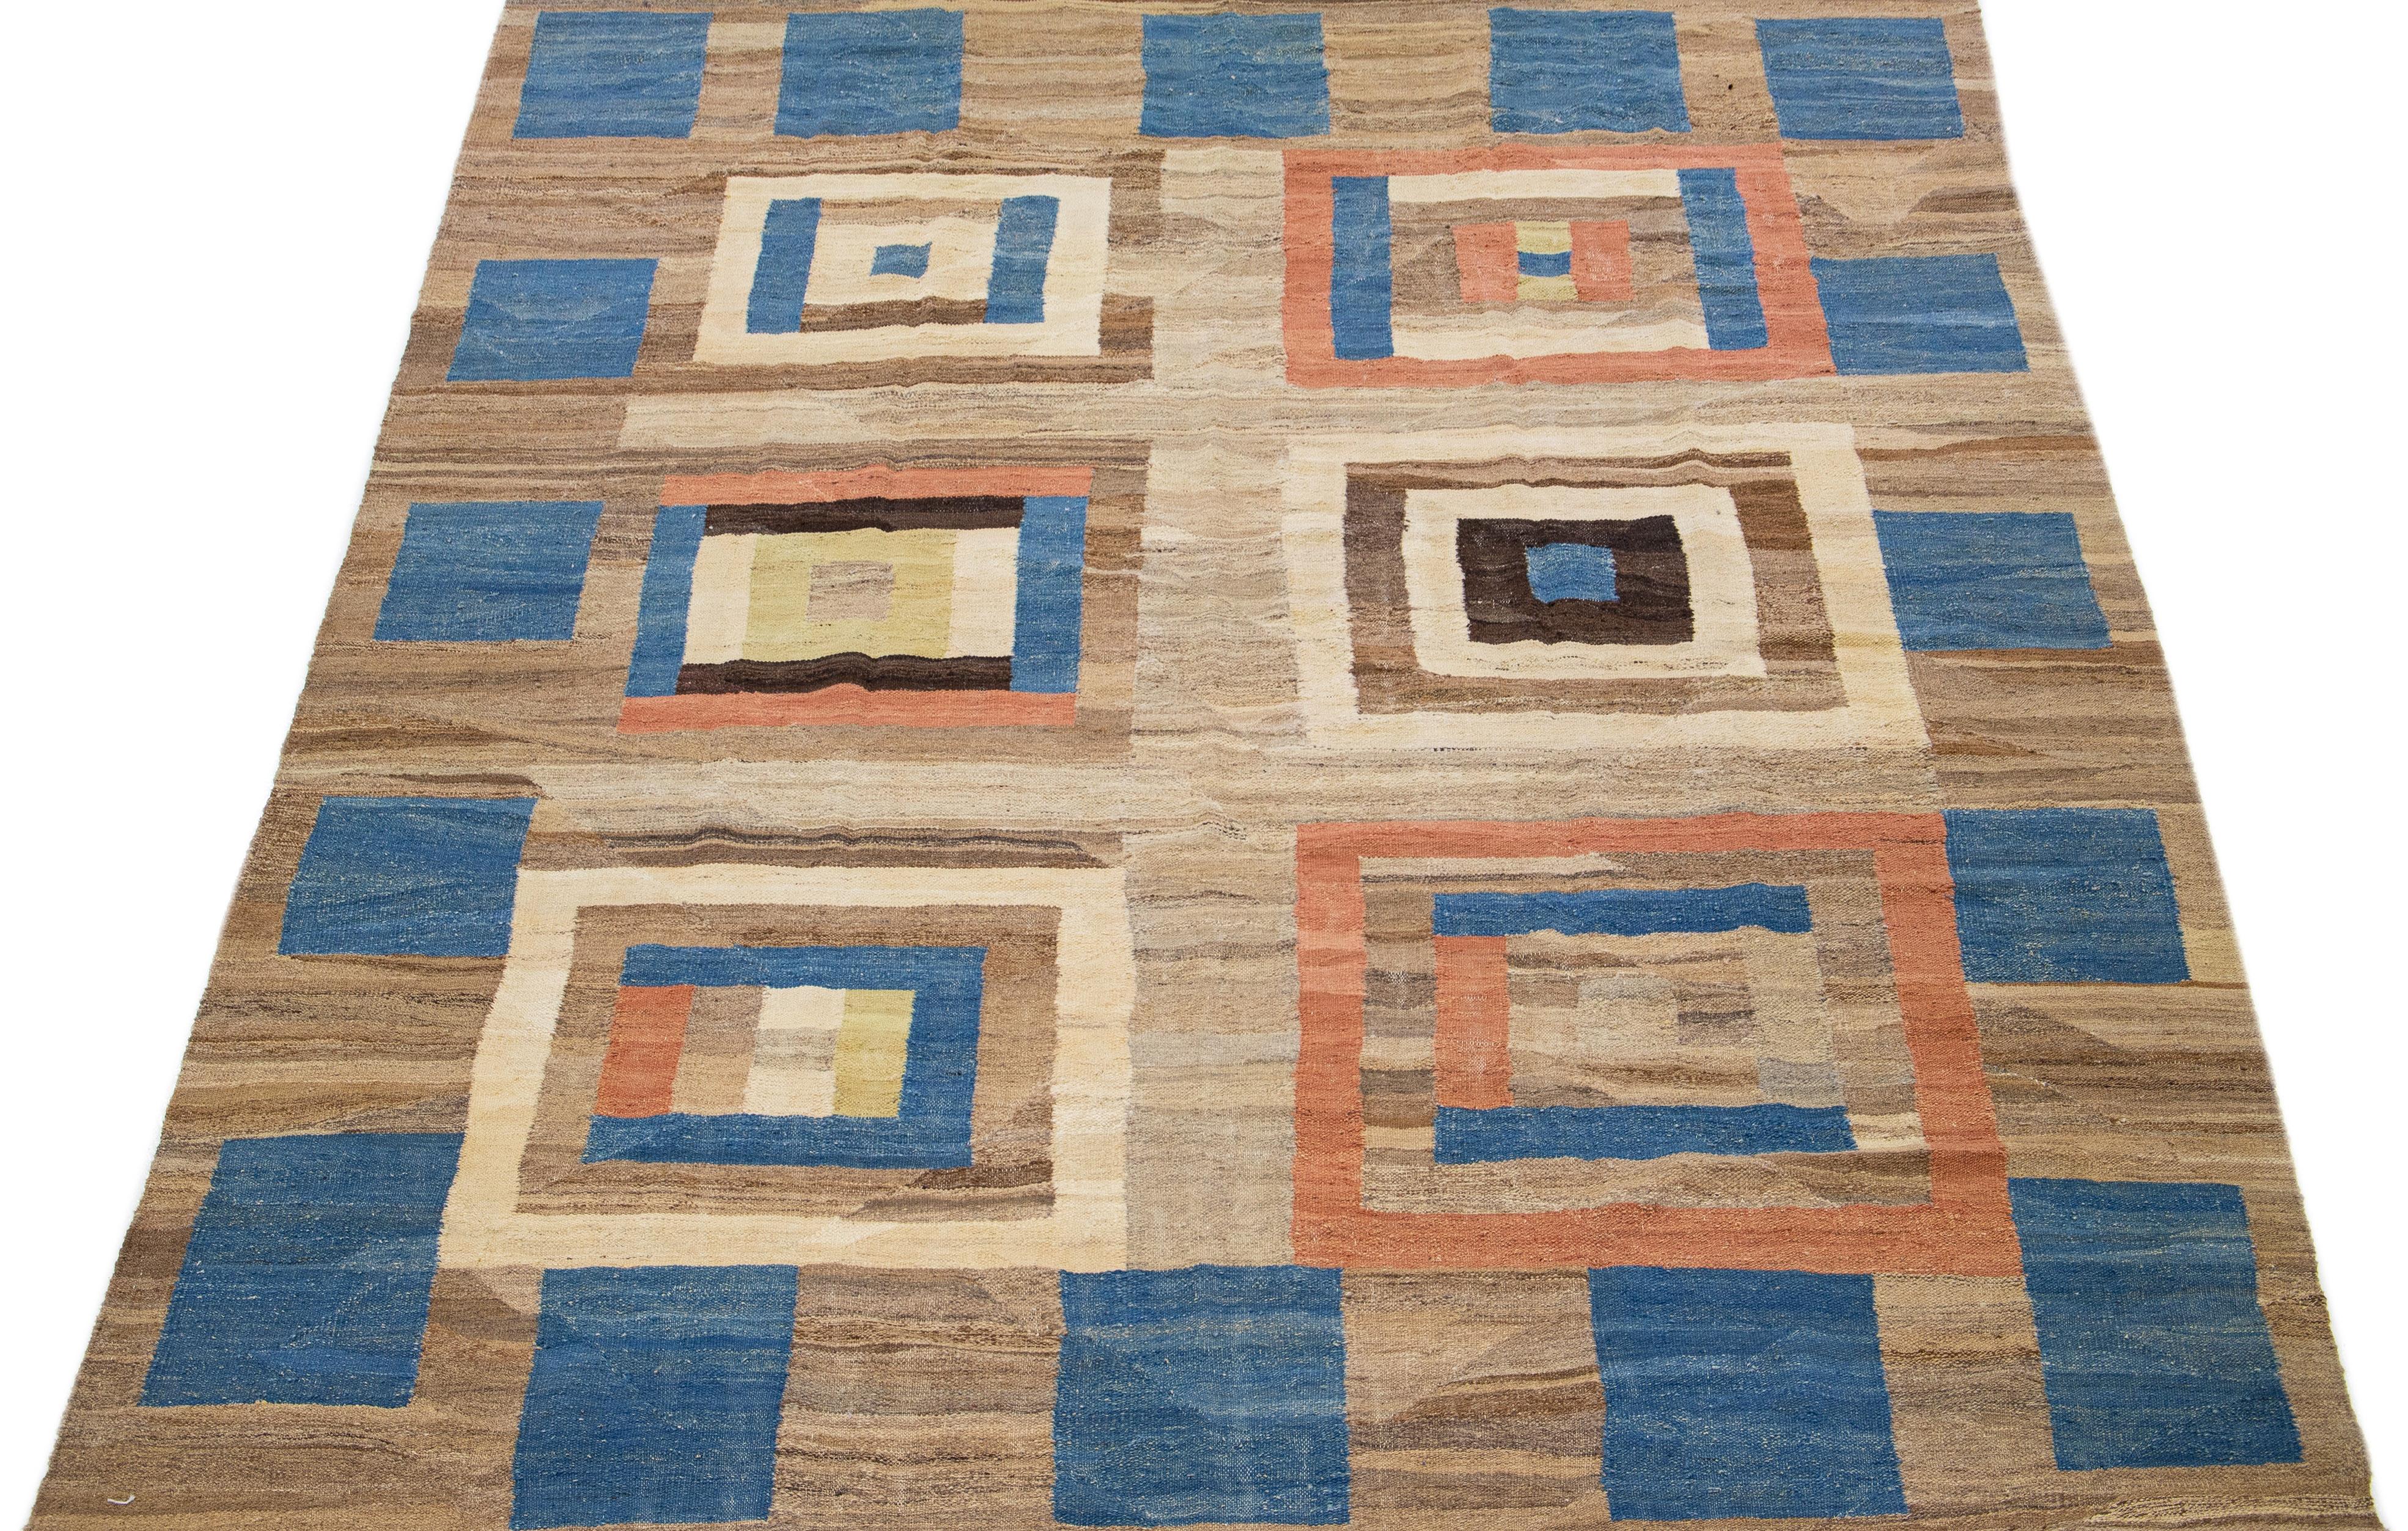 Beautiful Contemporary Kilim wool rug with a brown color field. This flatweave rug features a gorgeous geometric deco design in beige, orange, and blue accents. Combining brown, beige, orange, and blue creates visually stunning geometric shapes,